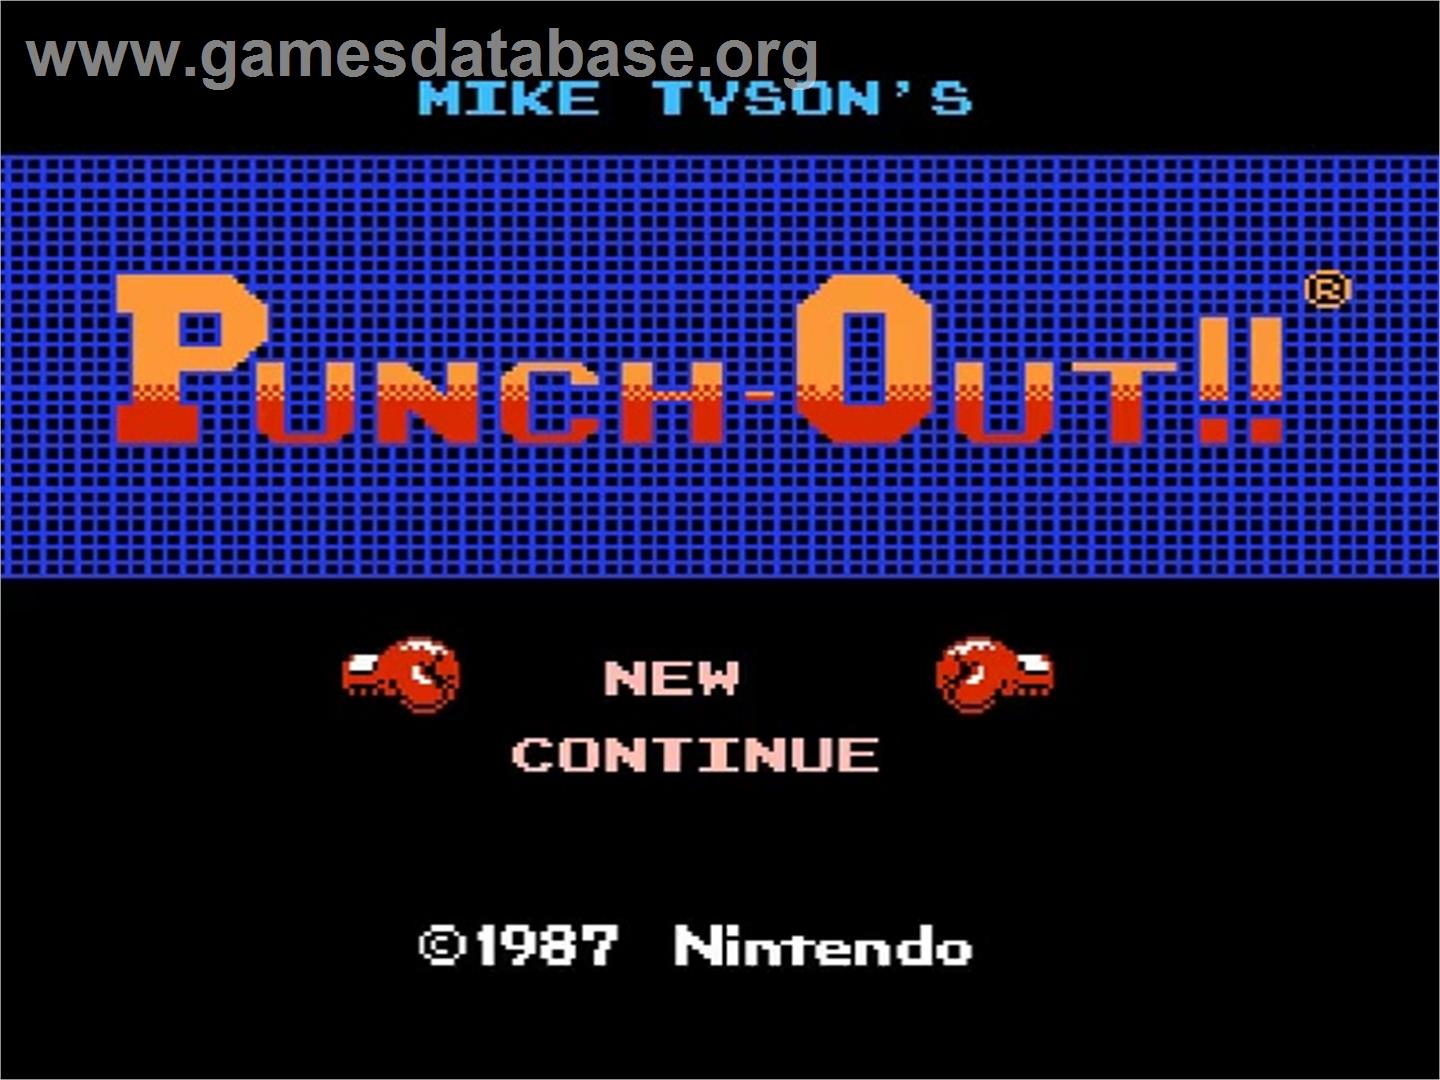 Mike Tyson's Punch-Out!! - Nintendo NES - Artwork - Title Screen